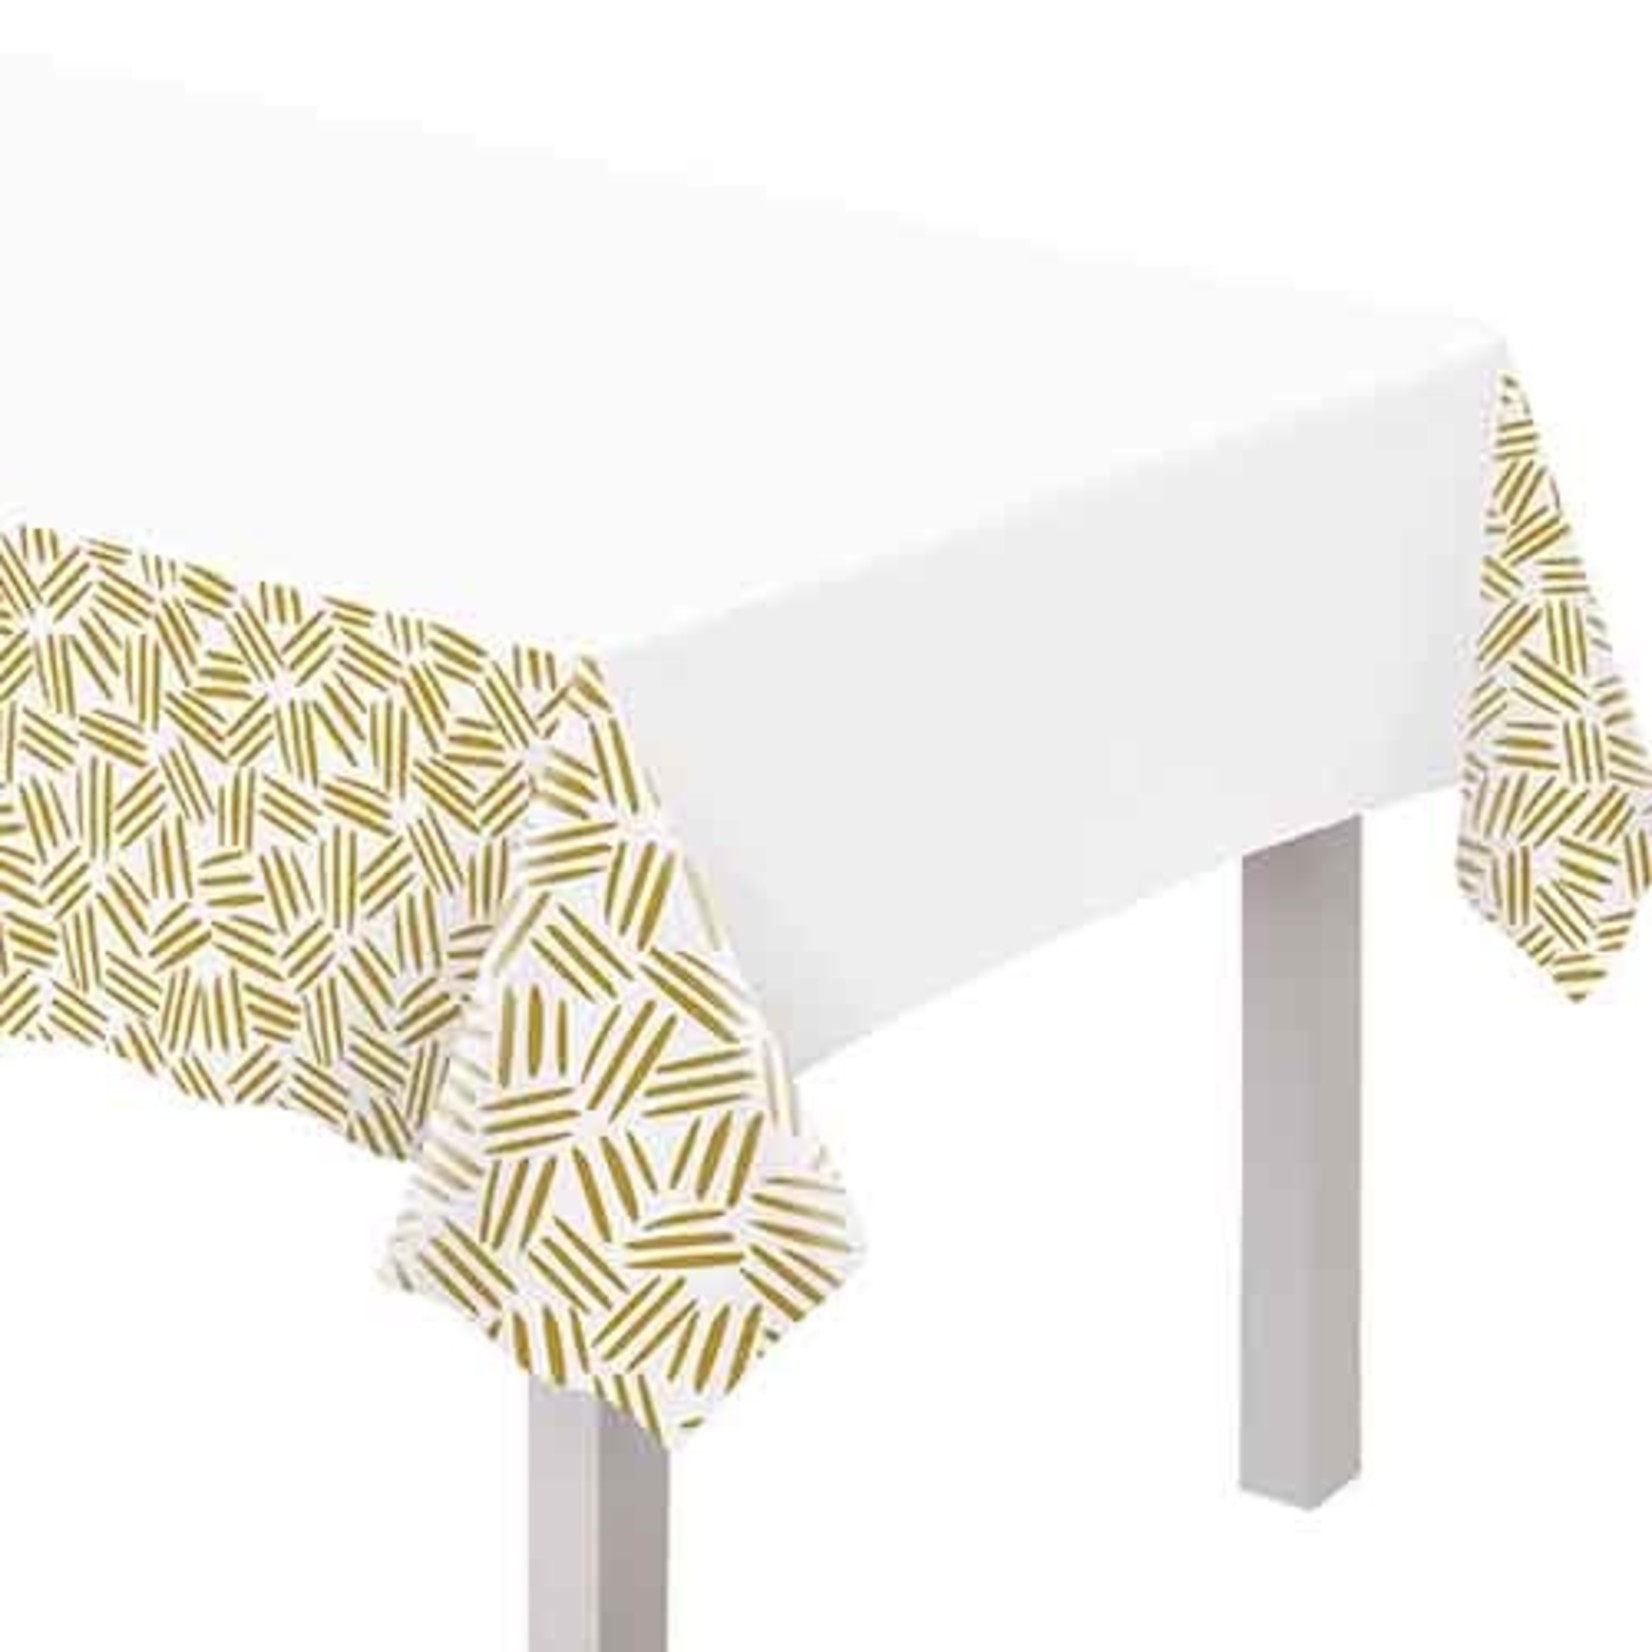 Amscan Gold Motifs Plastic Table Cover - 54" x 102"